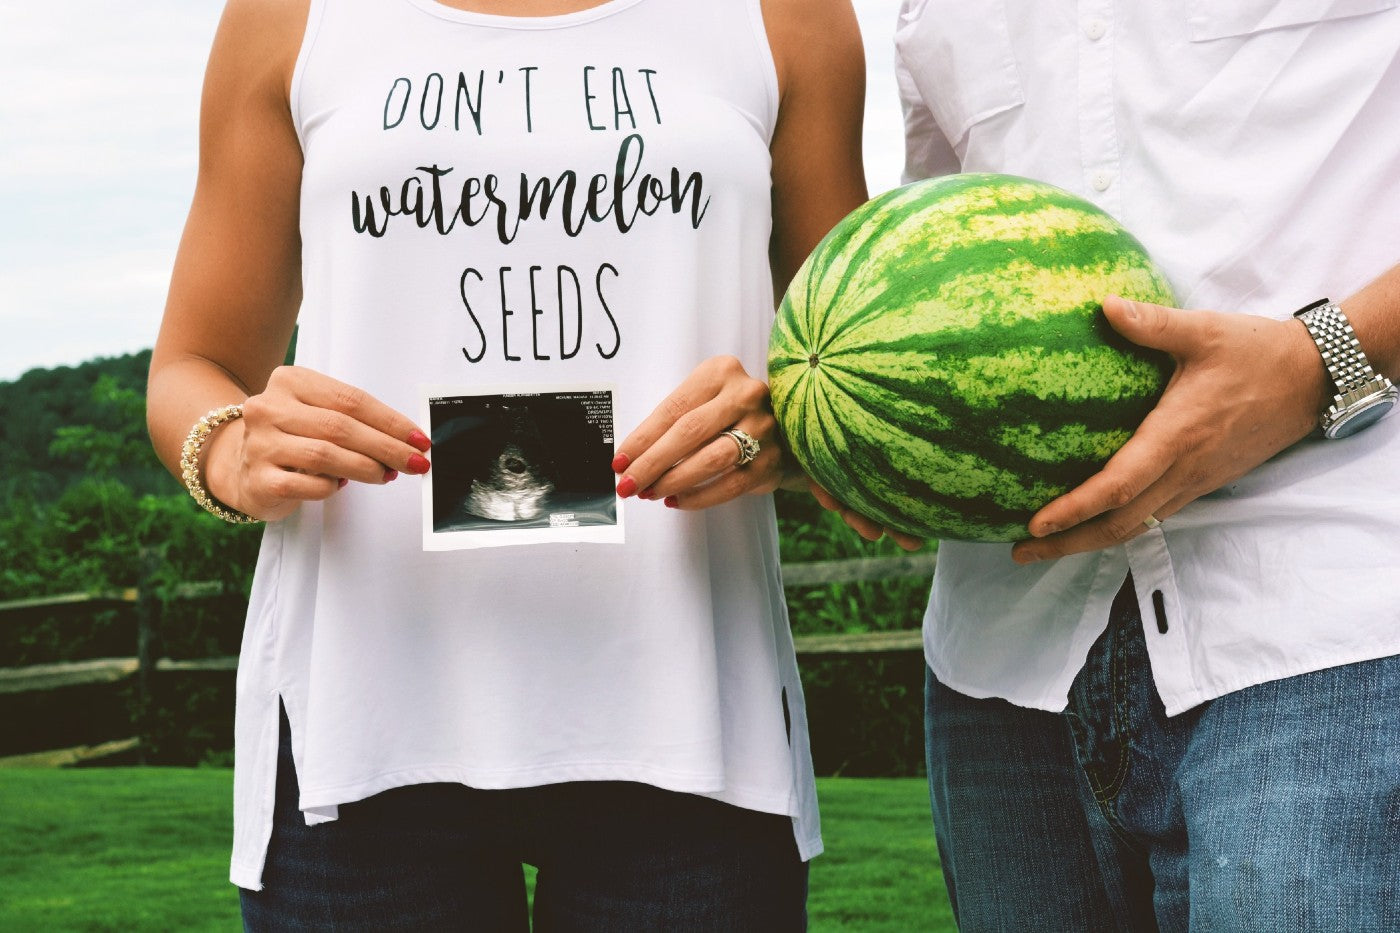 Funny Pregnancy Announcements – Happiest Baby